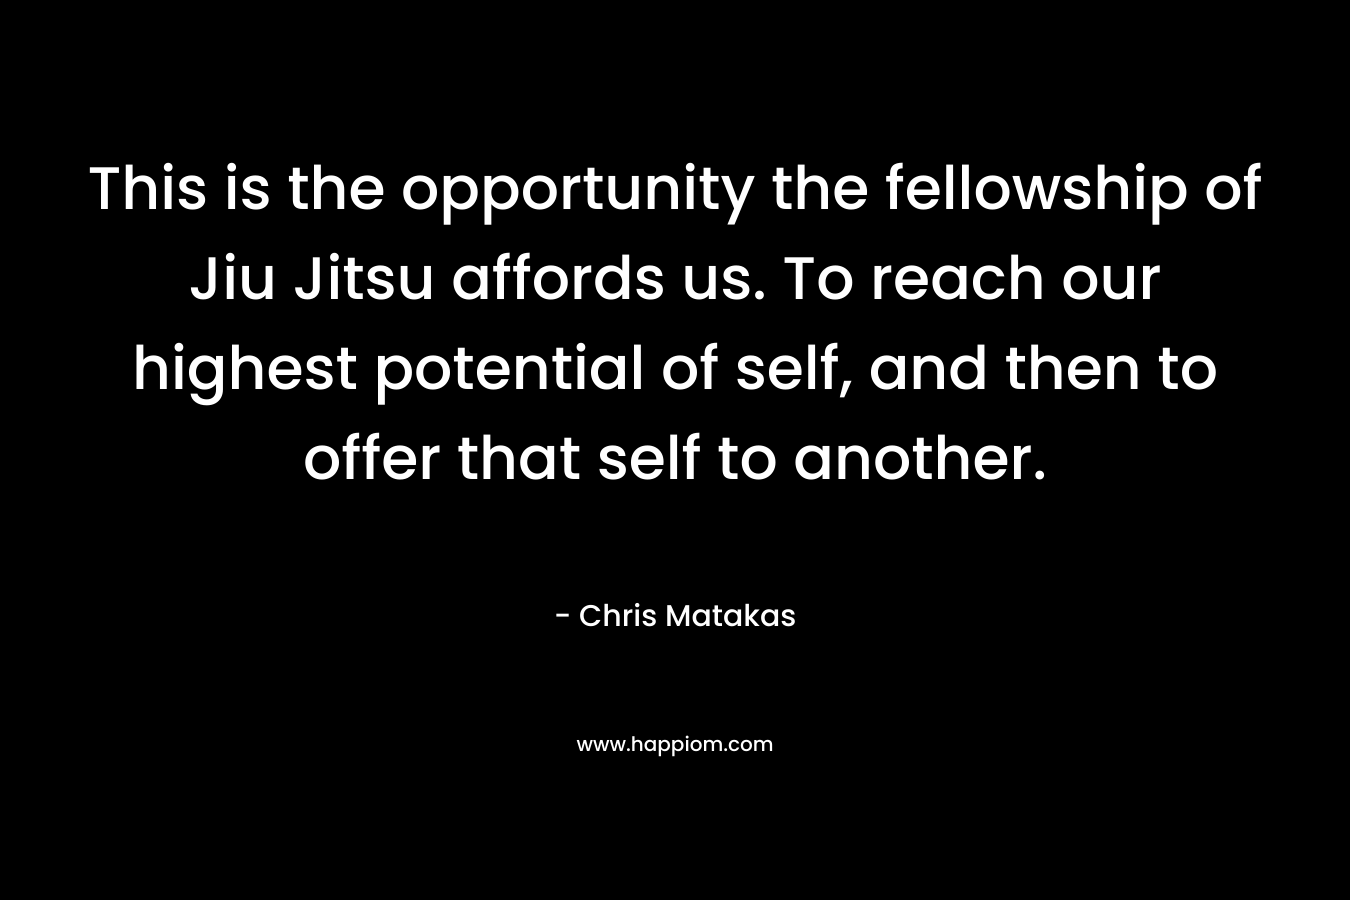 This is the opportunity the fellowship of Jiu Jitsu affords us. To reach our highest potential of self, and then to offer that self to another. – Chris Matakas